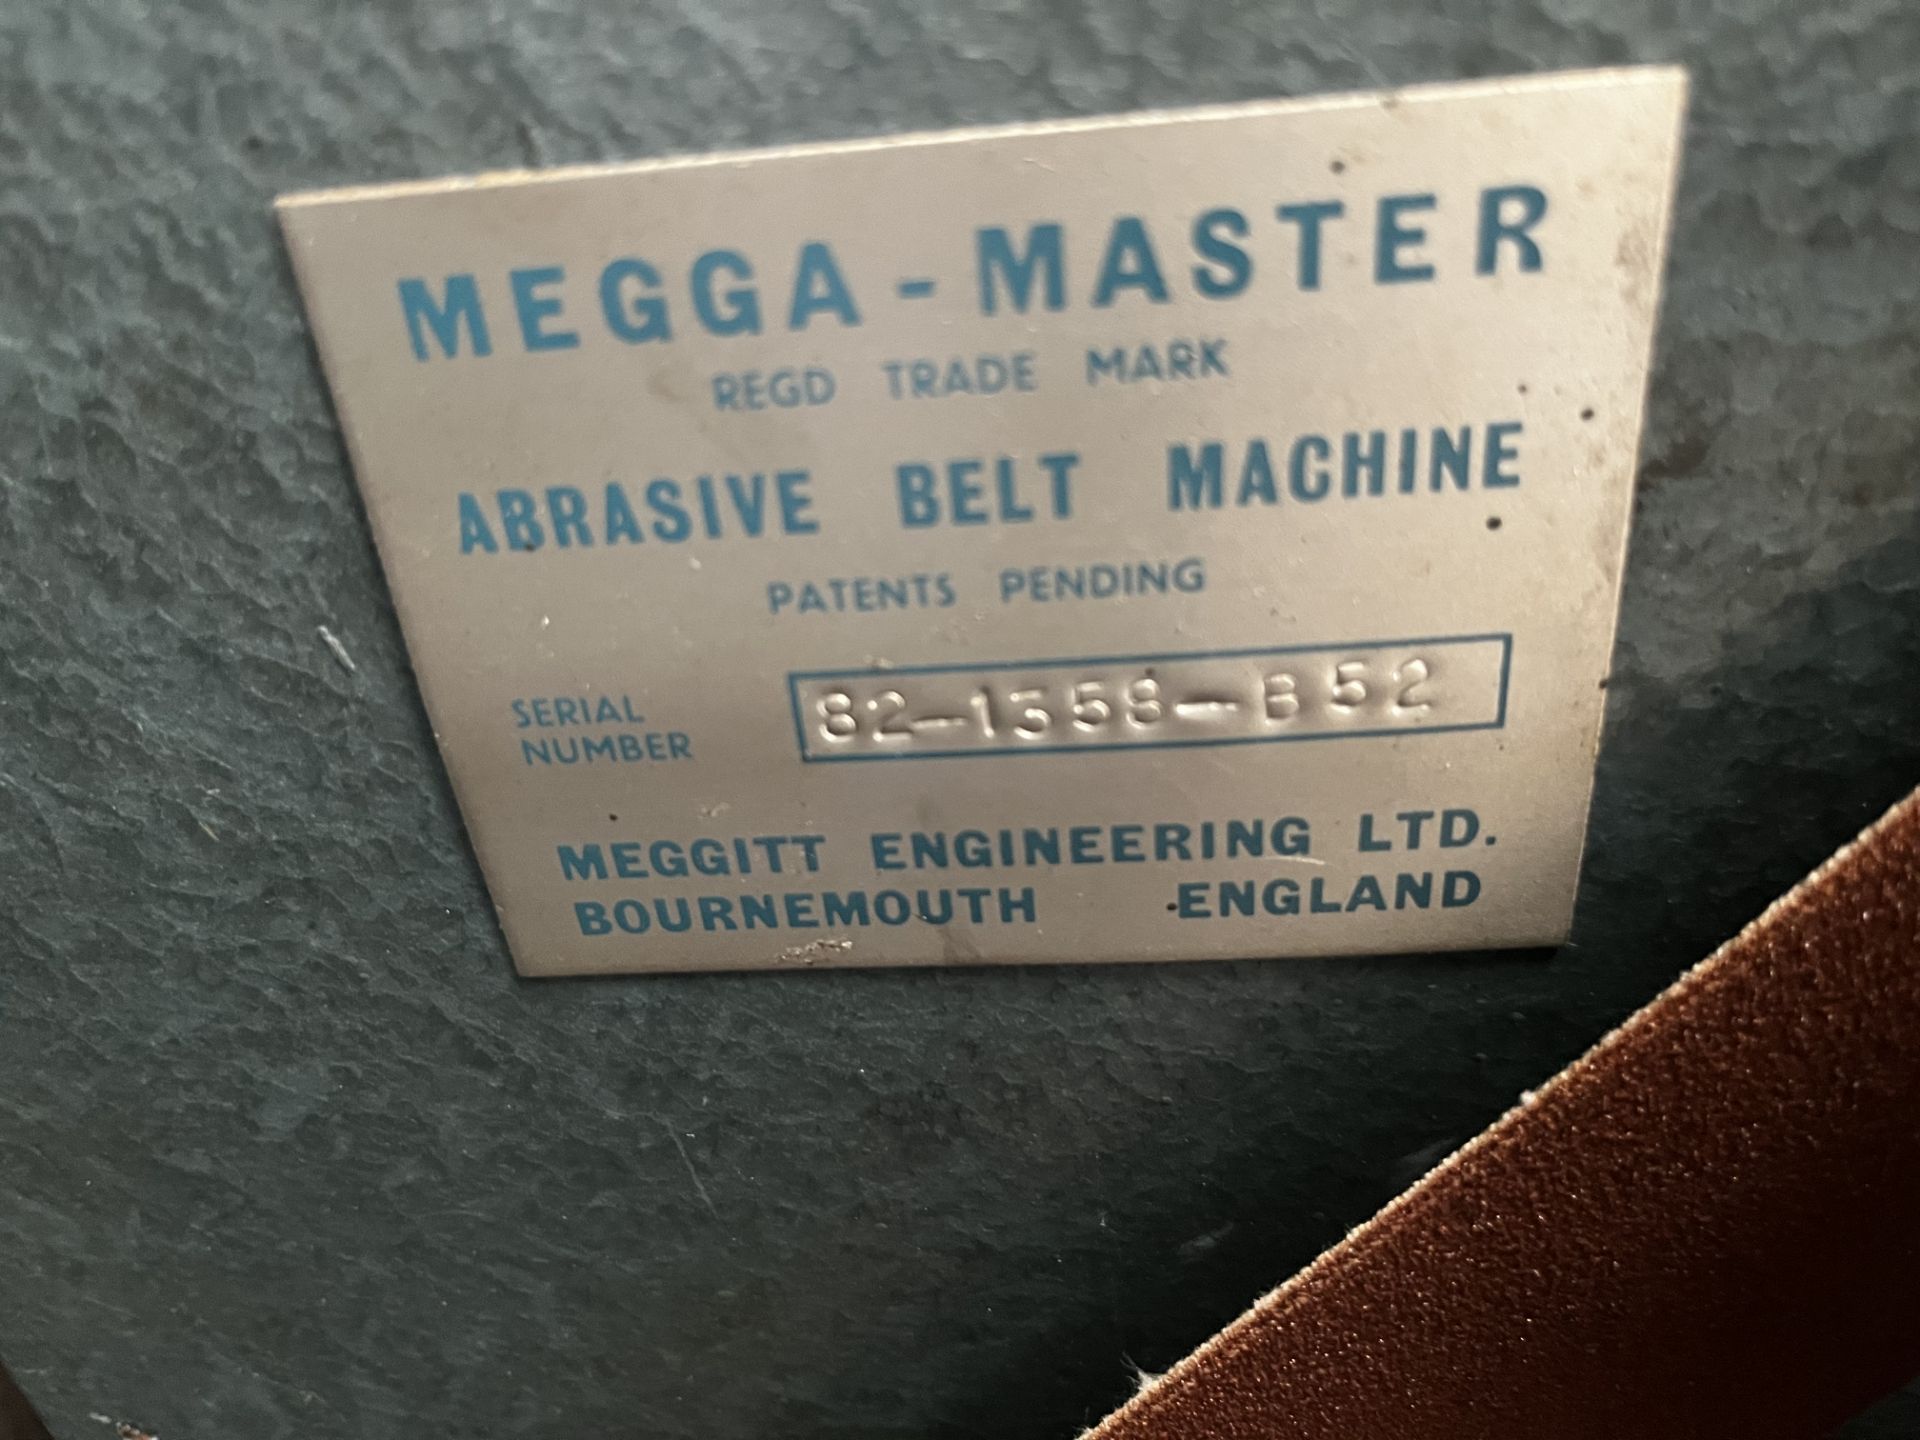 Meggamaster Model B52 Sanding Machine, Serial Number: 82-1358-B52 (Location: Christchurch. Please - Image 2 of 2